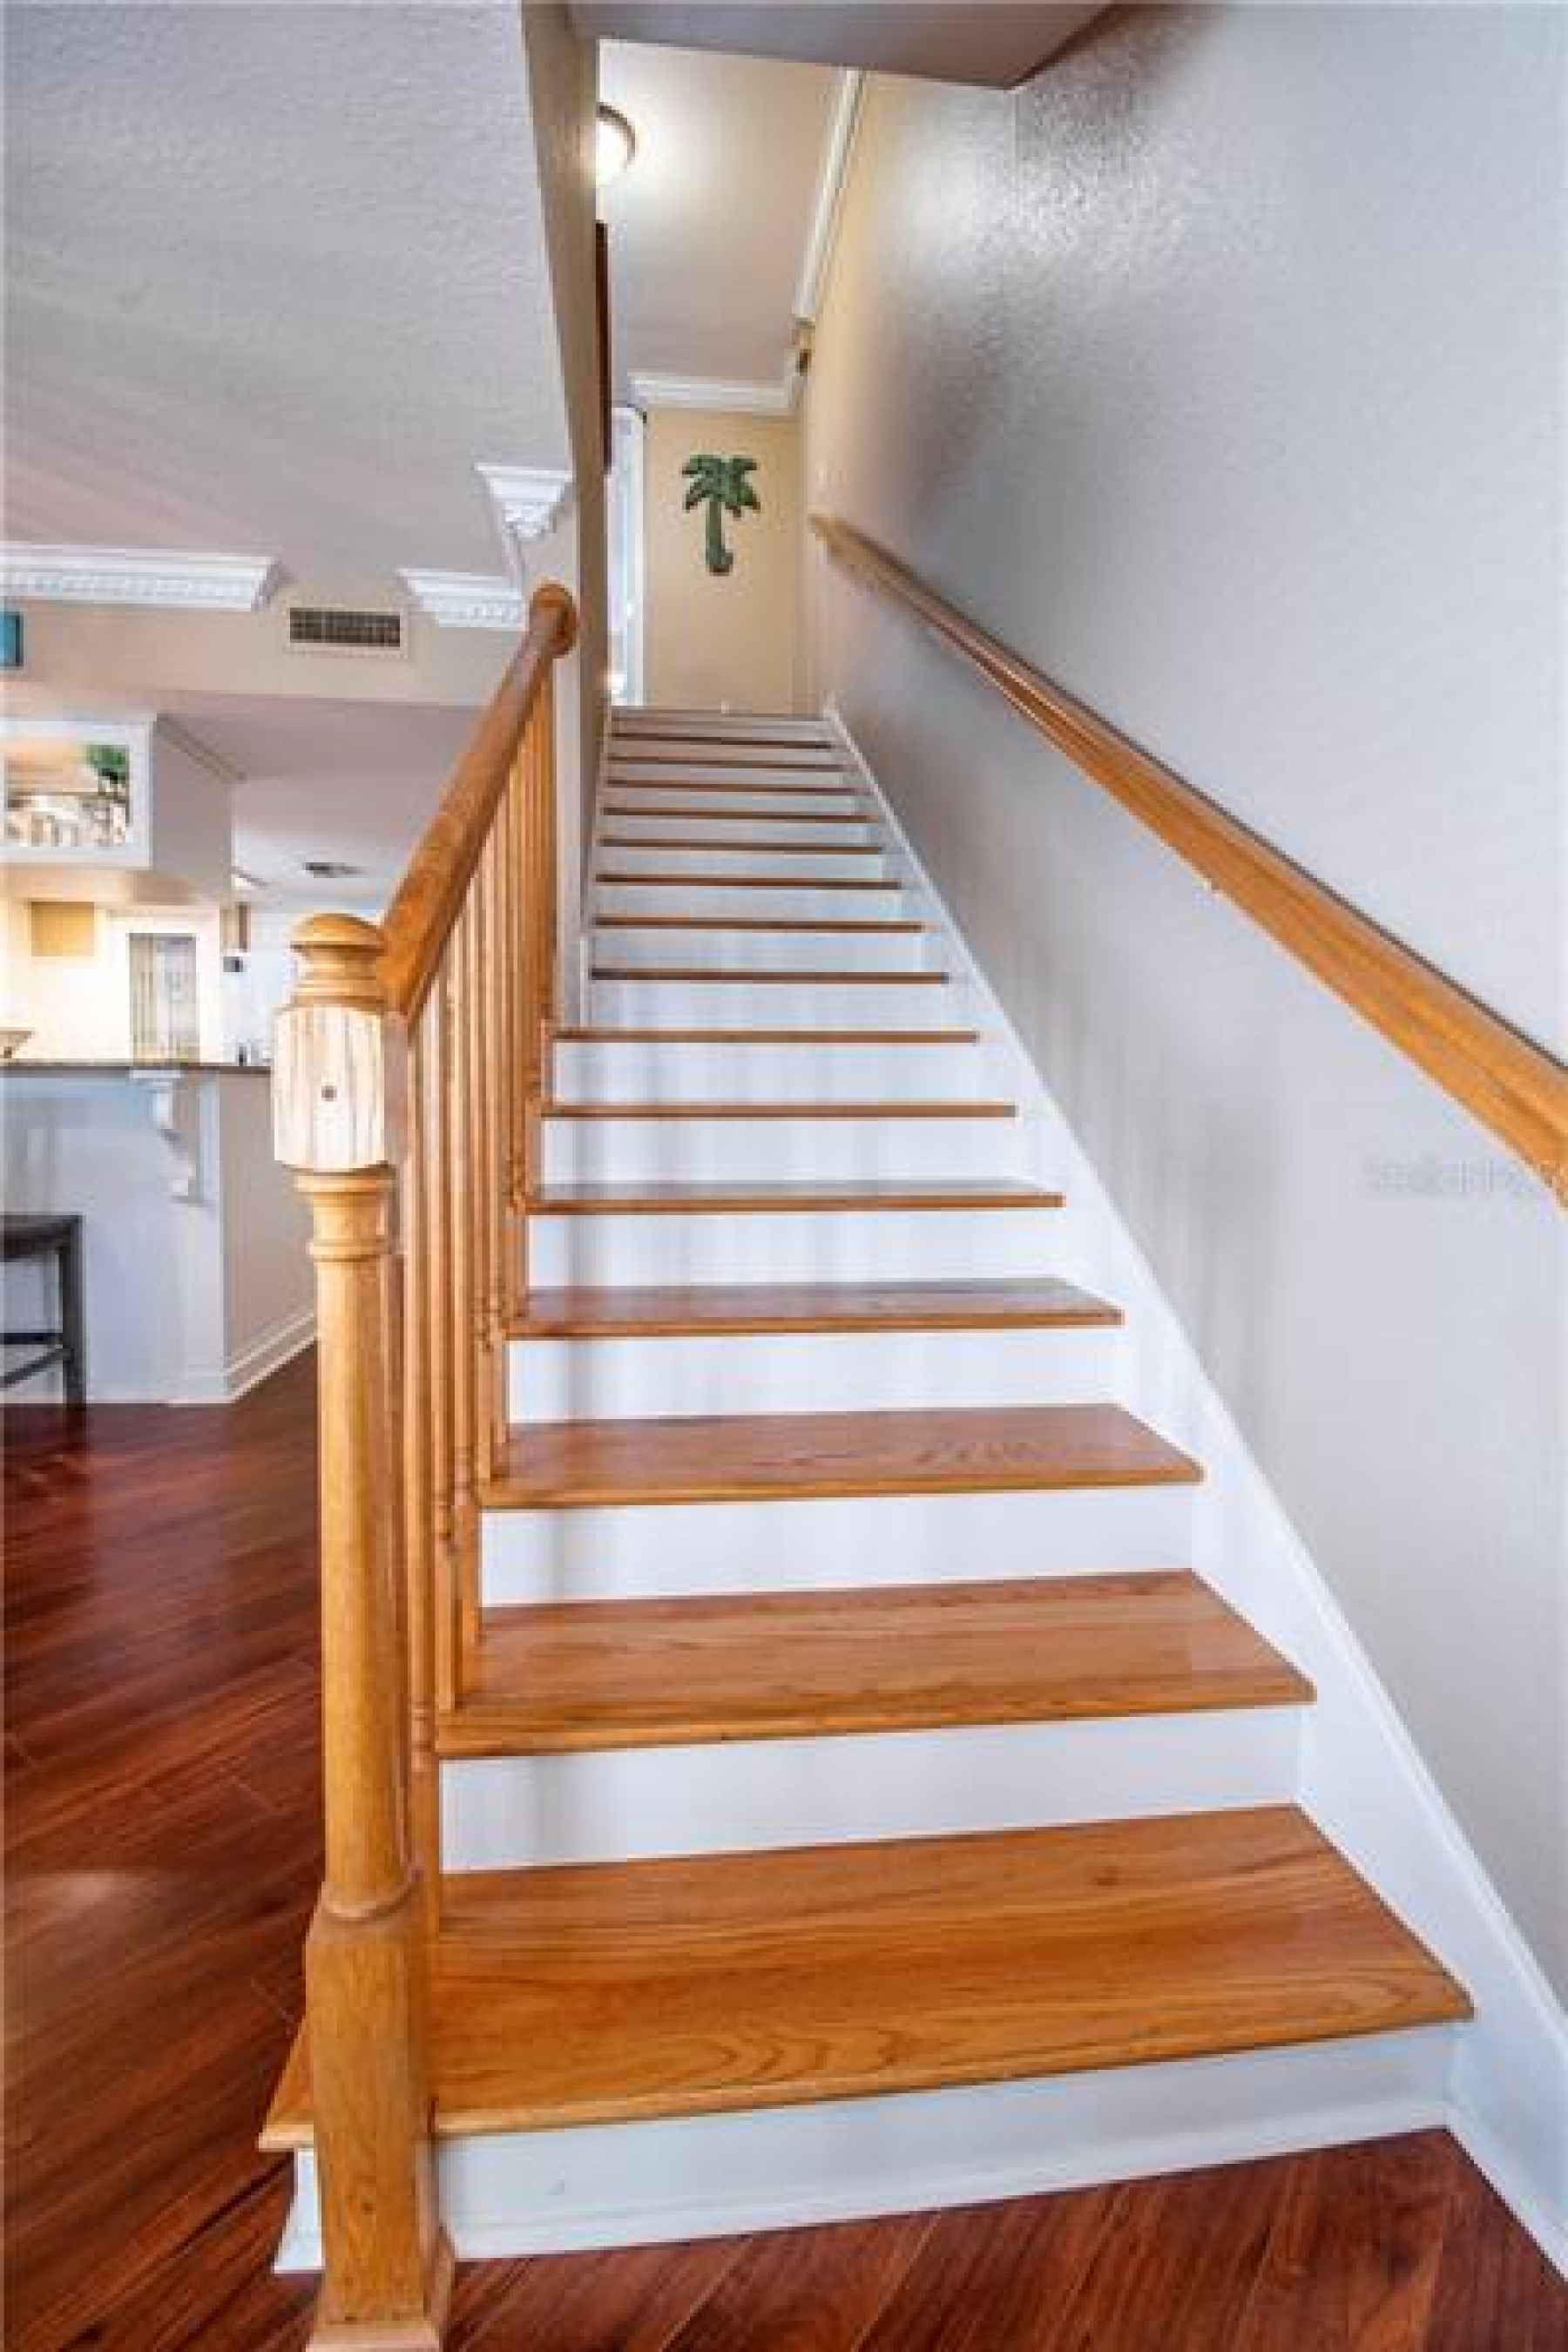 Stairs up to the third floor